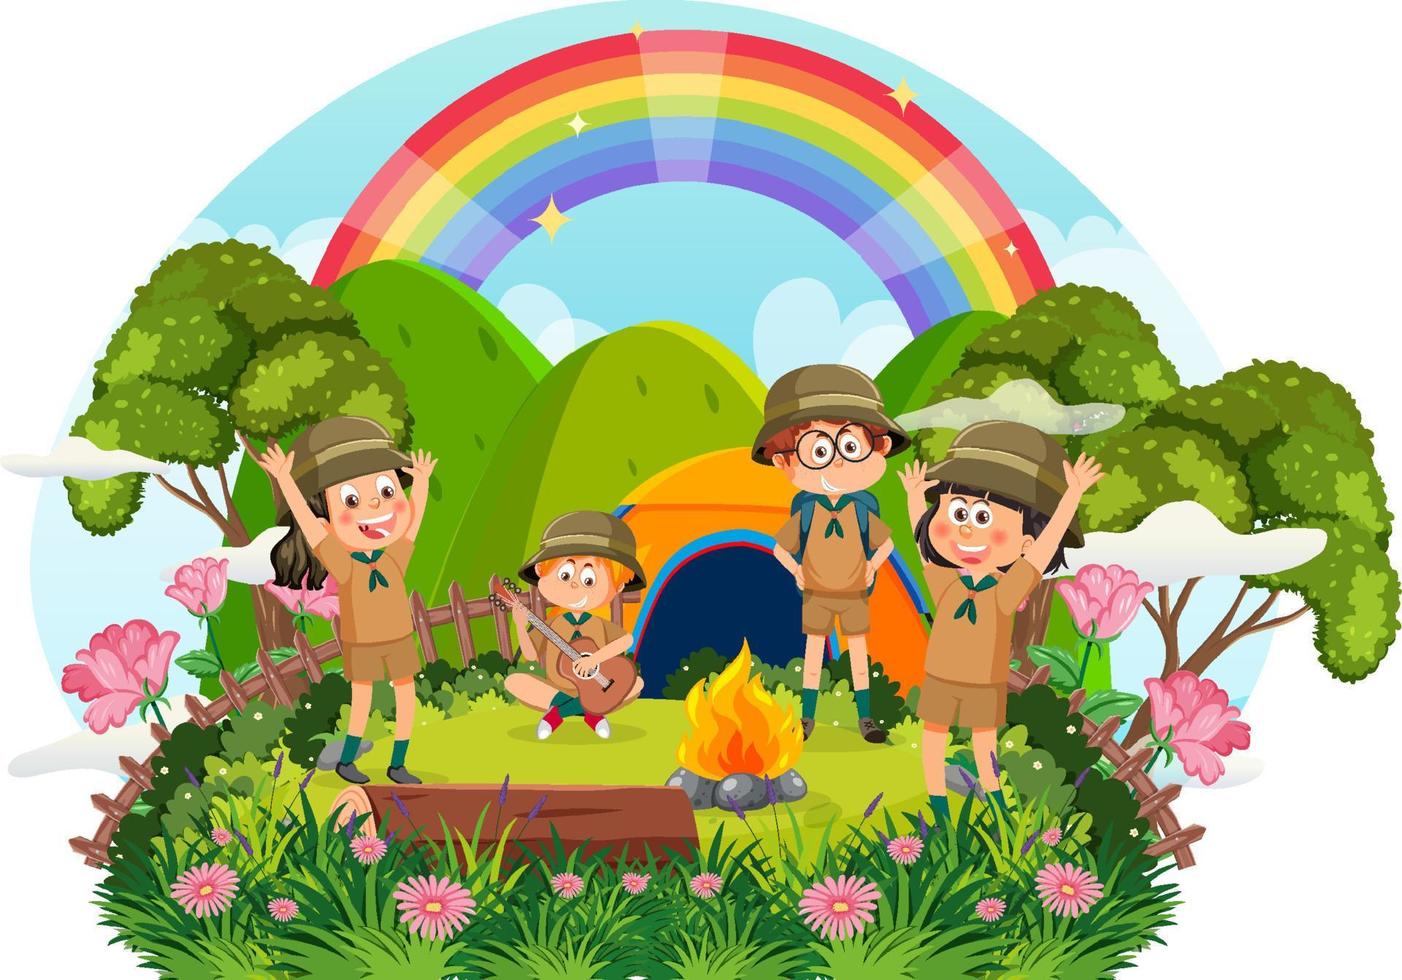 Camping children with rainbow in the sky vector